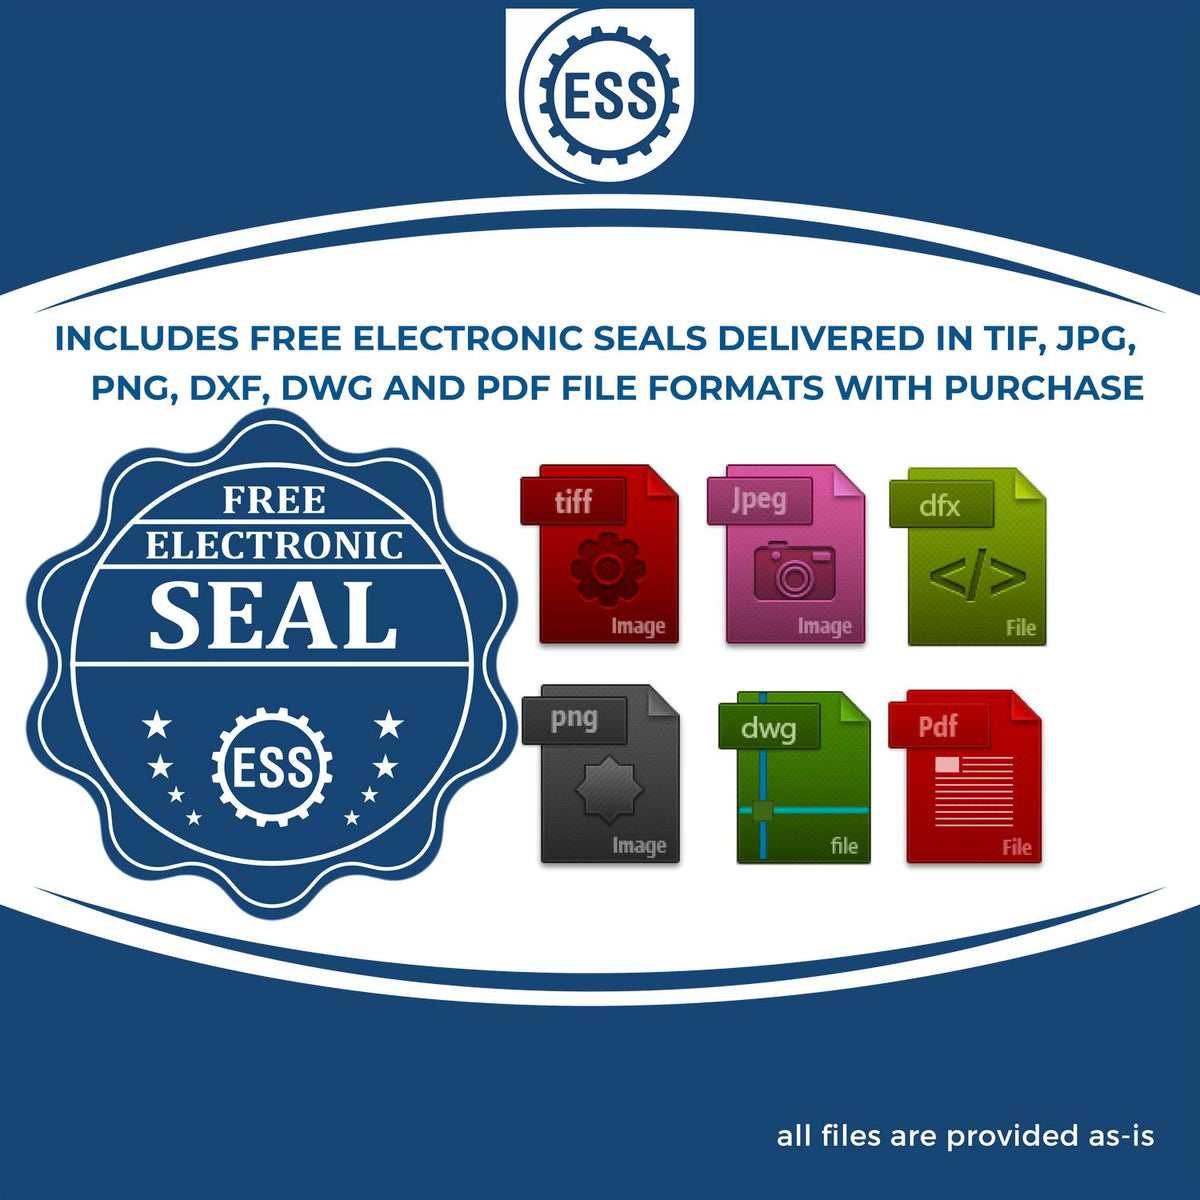 An infographic for the free electronic seal for the Premium MaxLight Pre-Inked Missouri Landscape Architectural Stamp illustrating the different file type icons such as DXF, DWG, TIF, JPG and PNG.